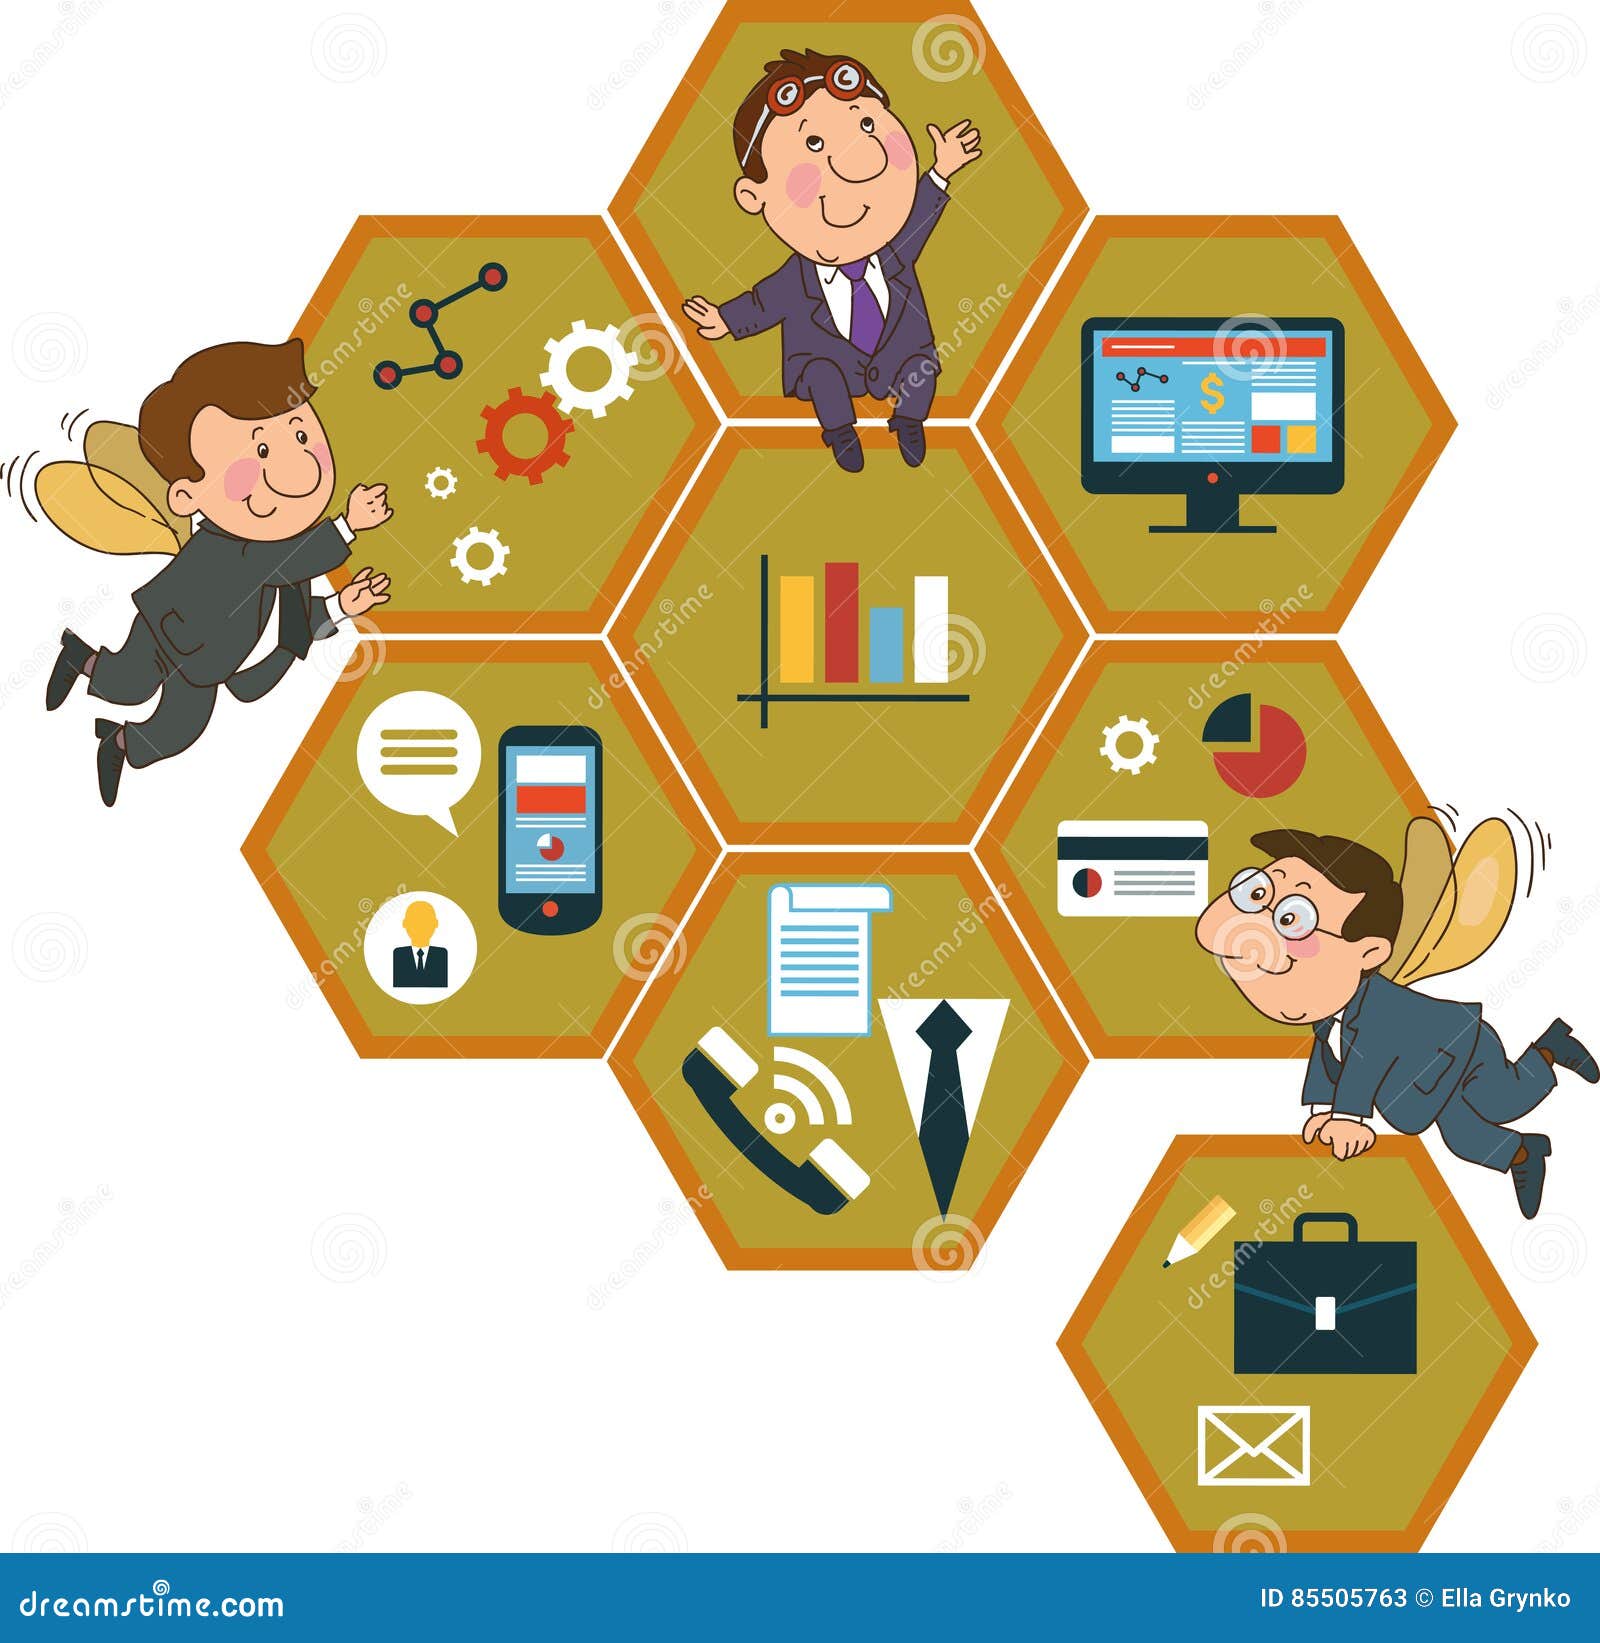 Background honeycomb structure with interface icons. Cartoon people on the background of the honeycomb structure with interface icons. Global business concept. Man in the global Internet.